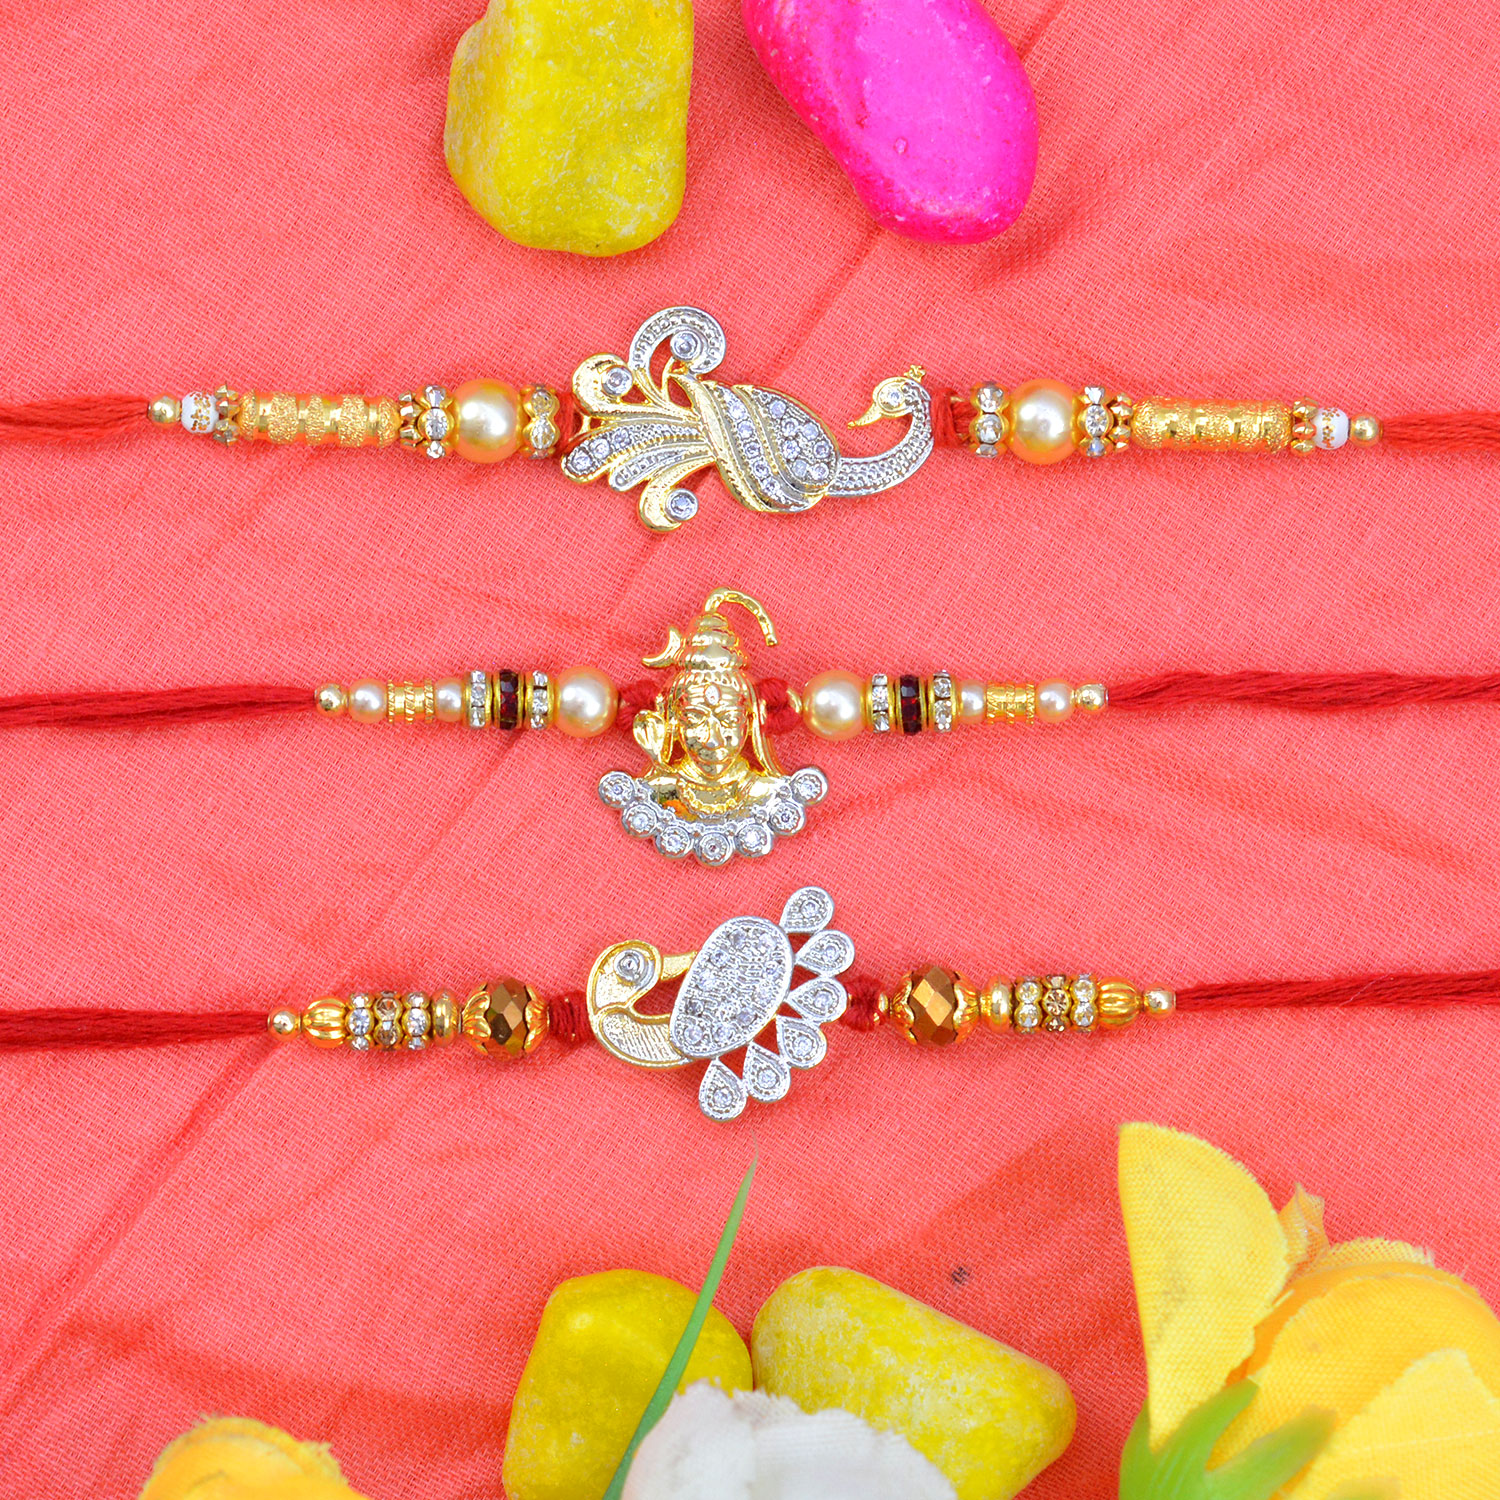 Two Golden and Silver Color Peacock with One Sacred lord Shiva Brothers Rakhi Set of 3